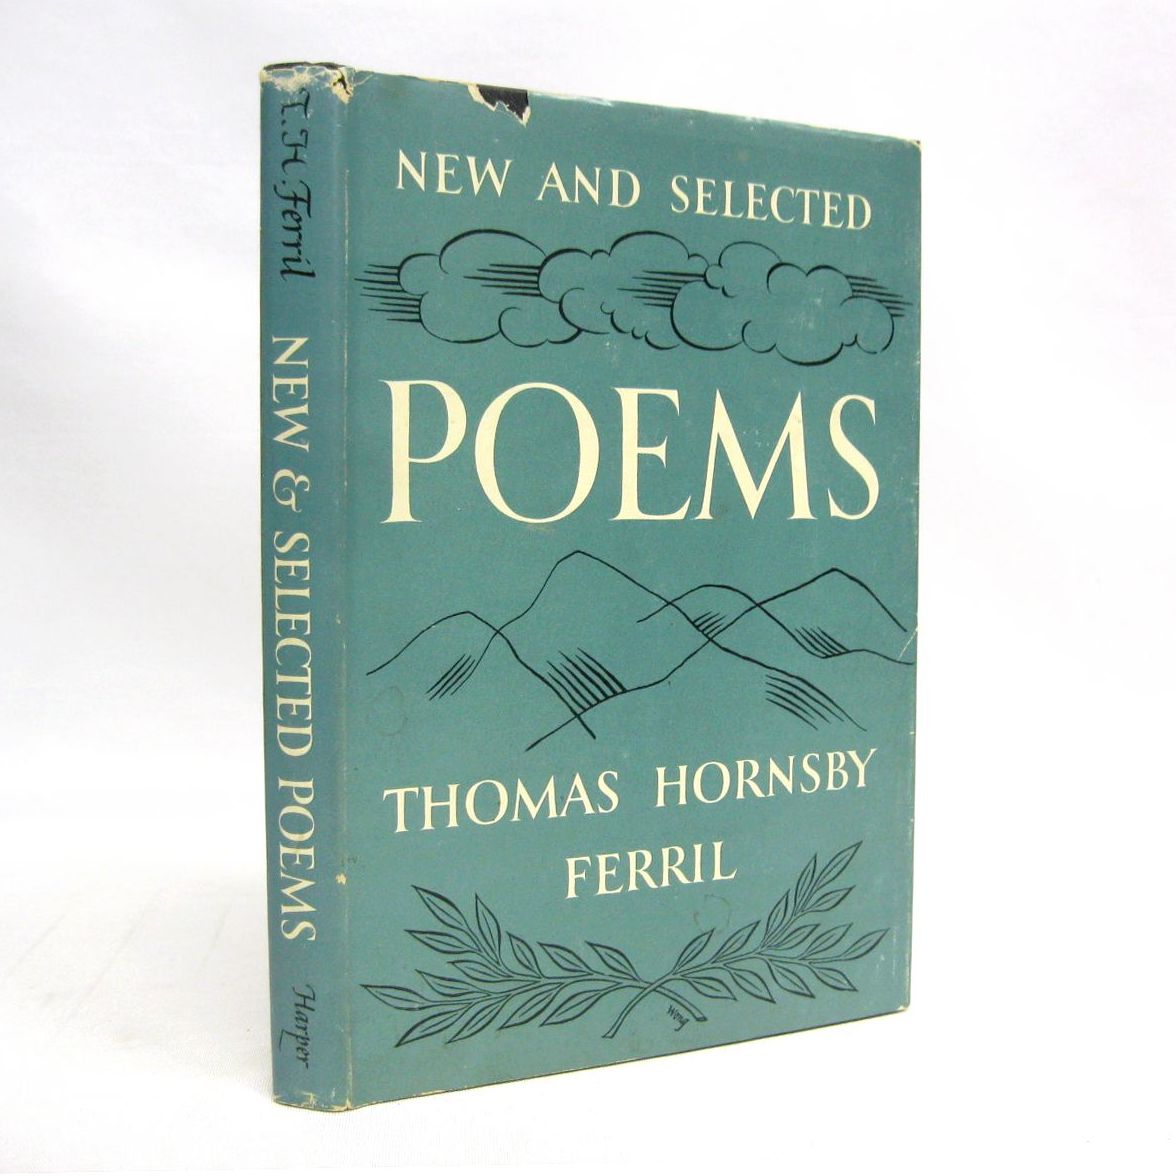 New and Selected Poems by Thomas Hornsby Ferril